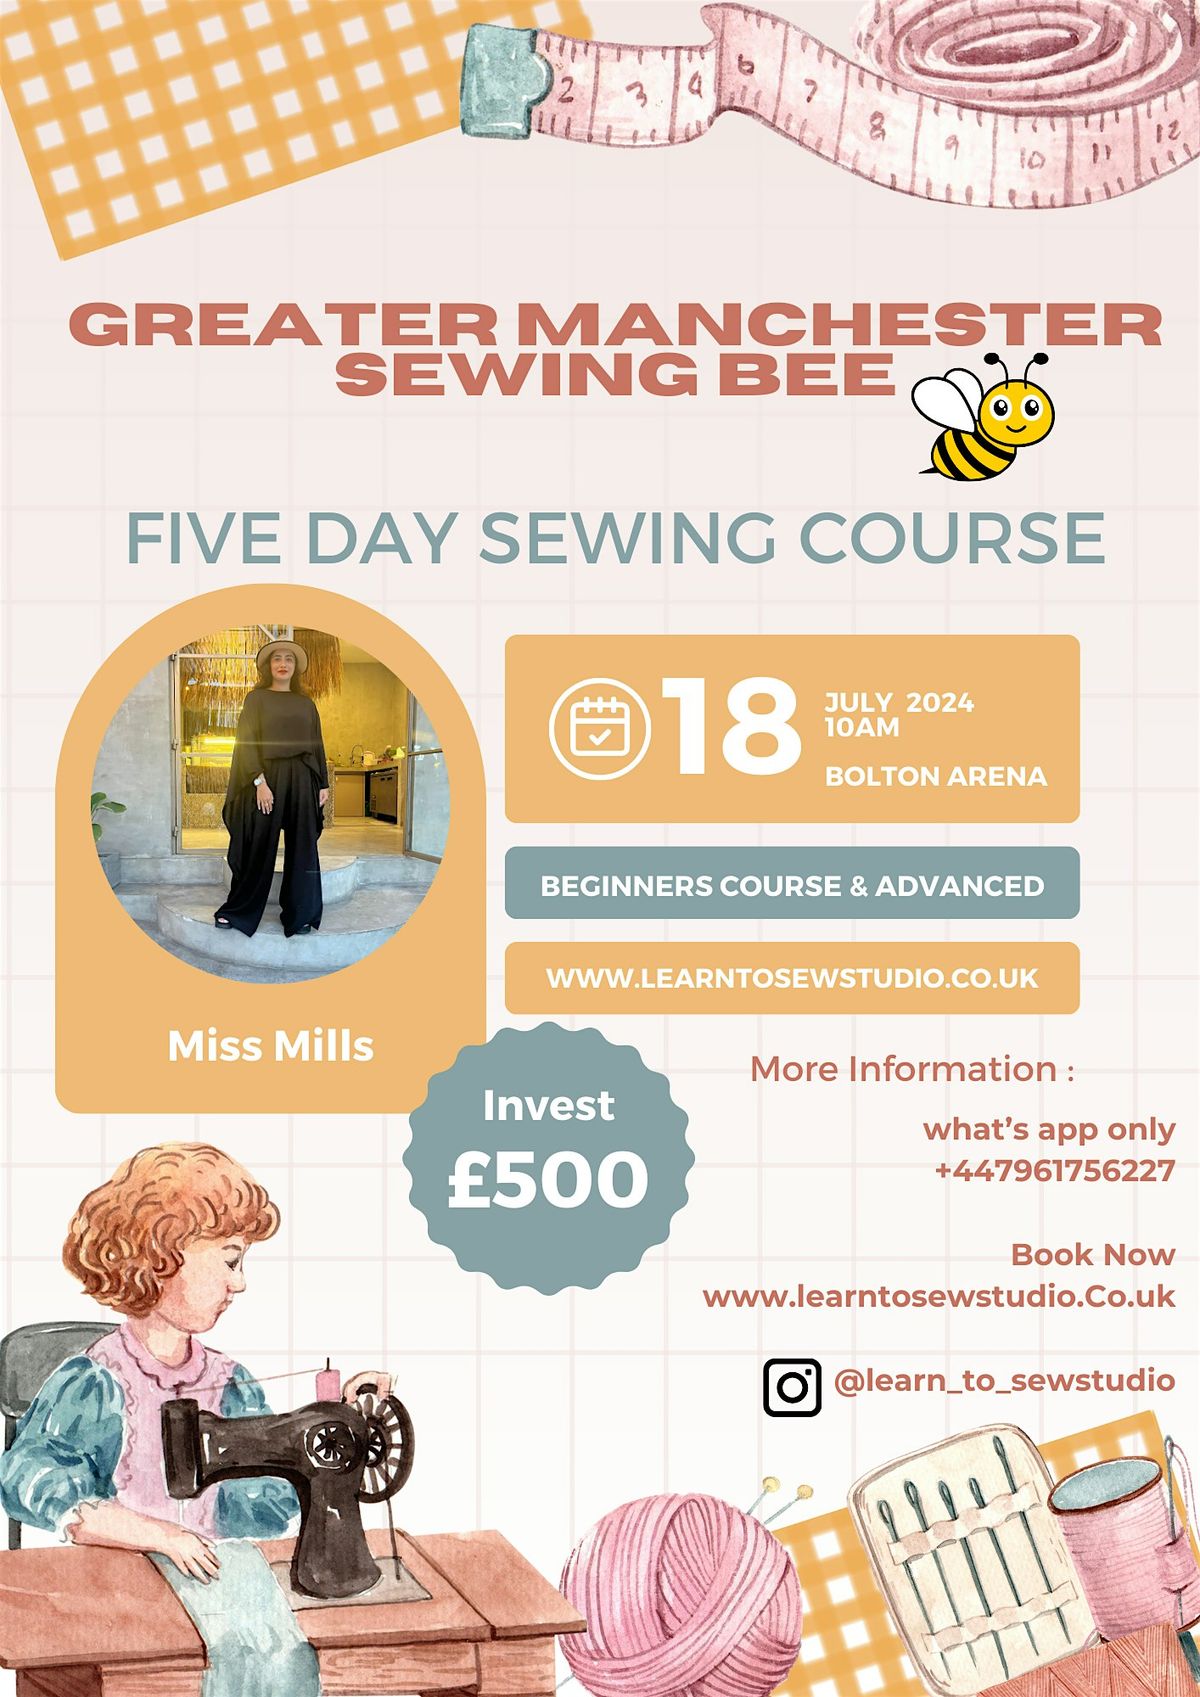 Five Day Sewing Course